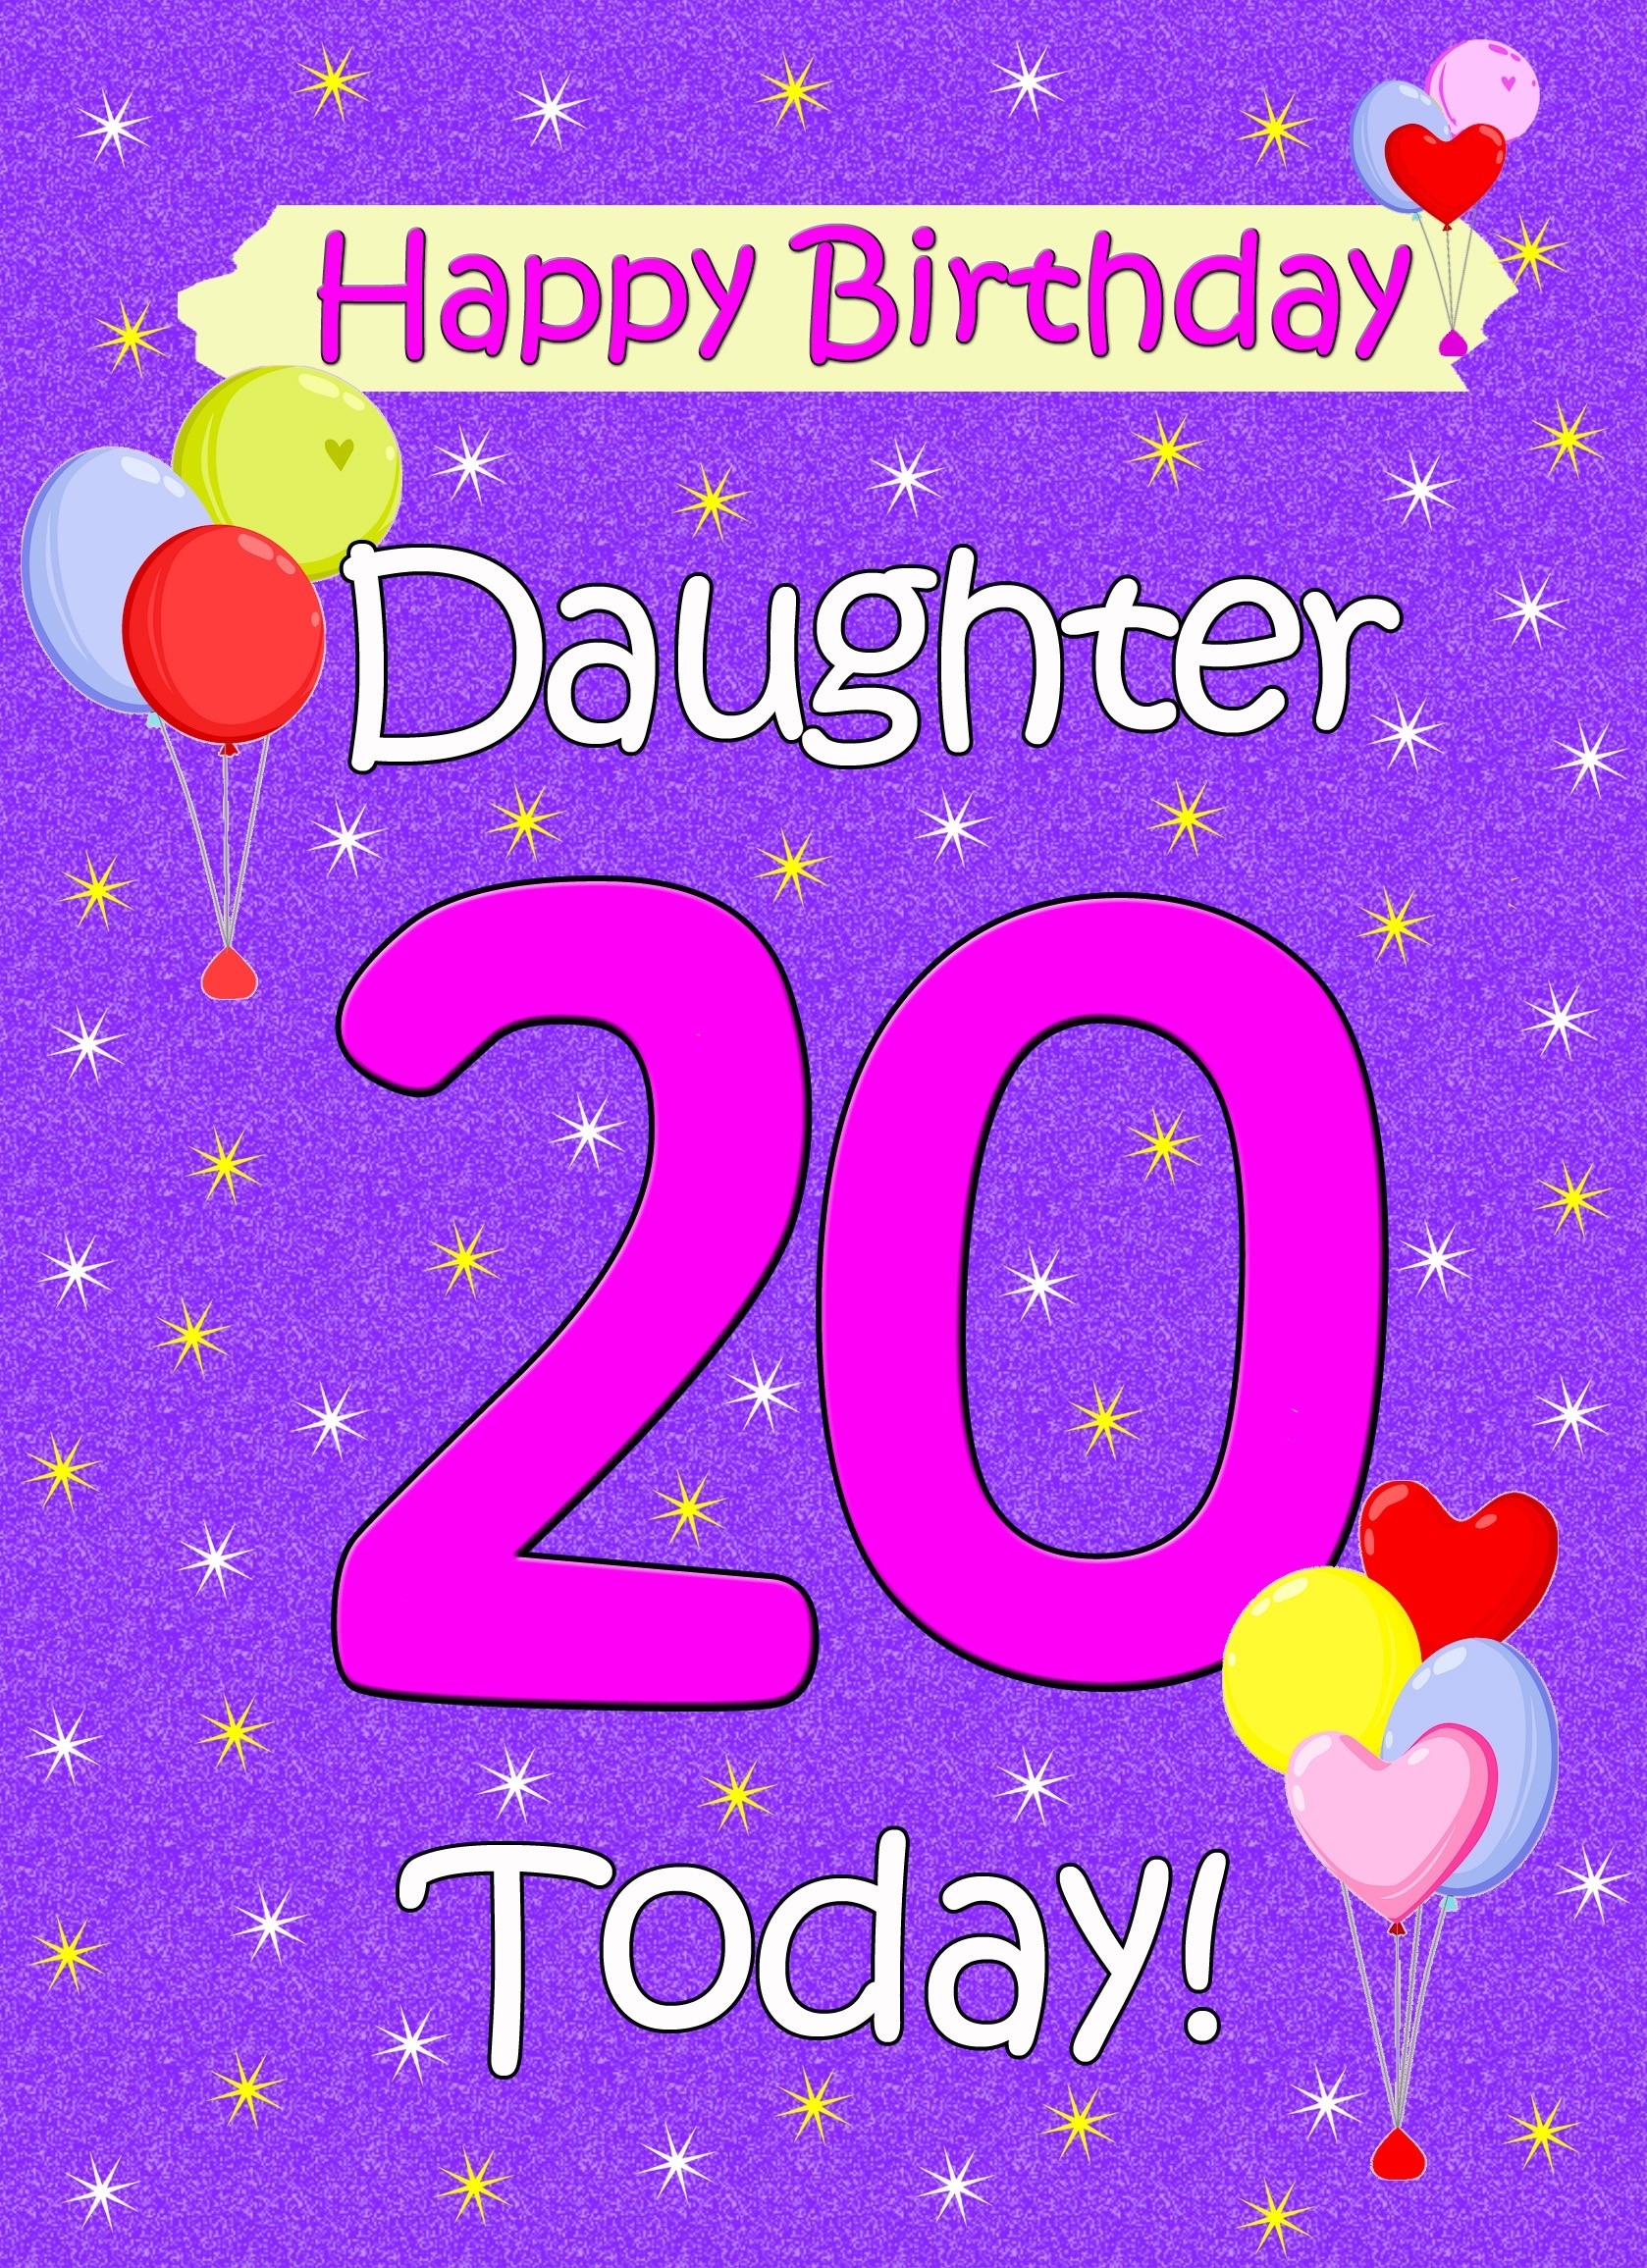 Daughter 20th Birthday Card (Lilac)